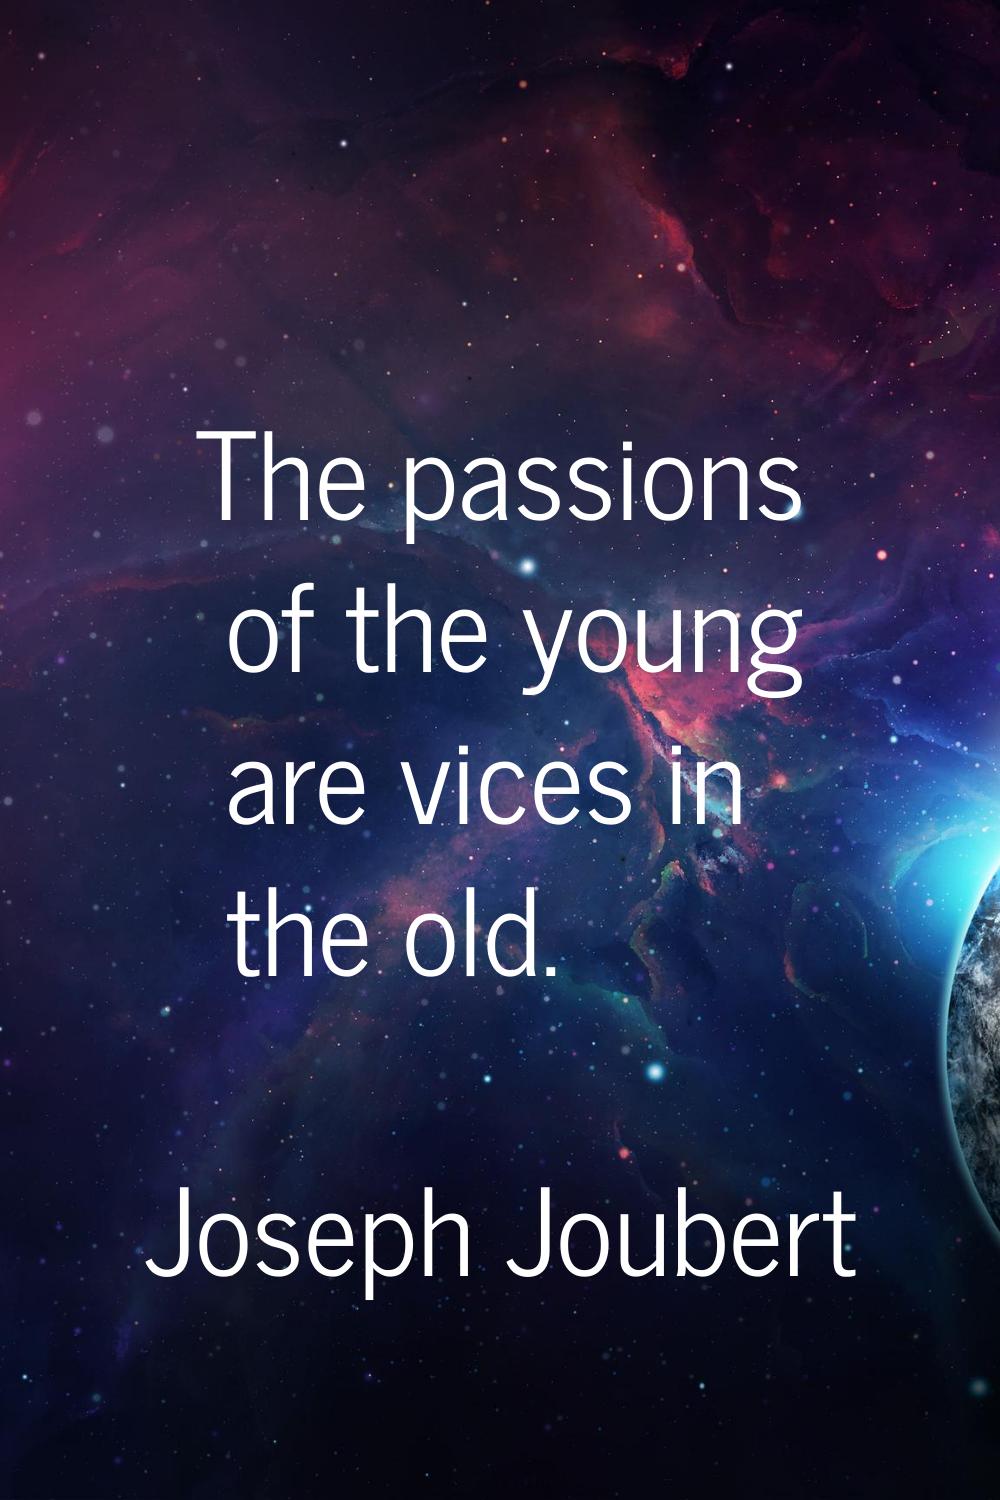 The passions of the young are vices in the old.